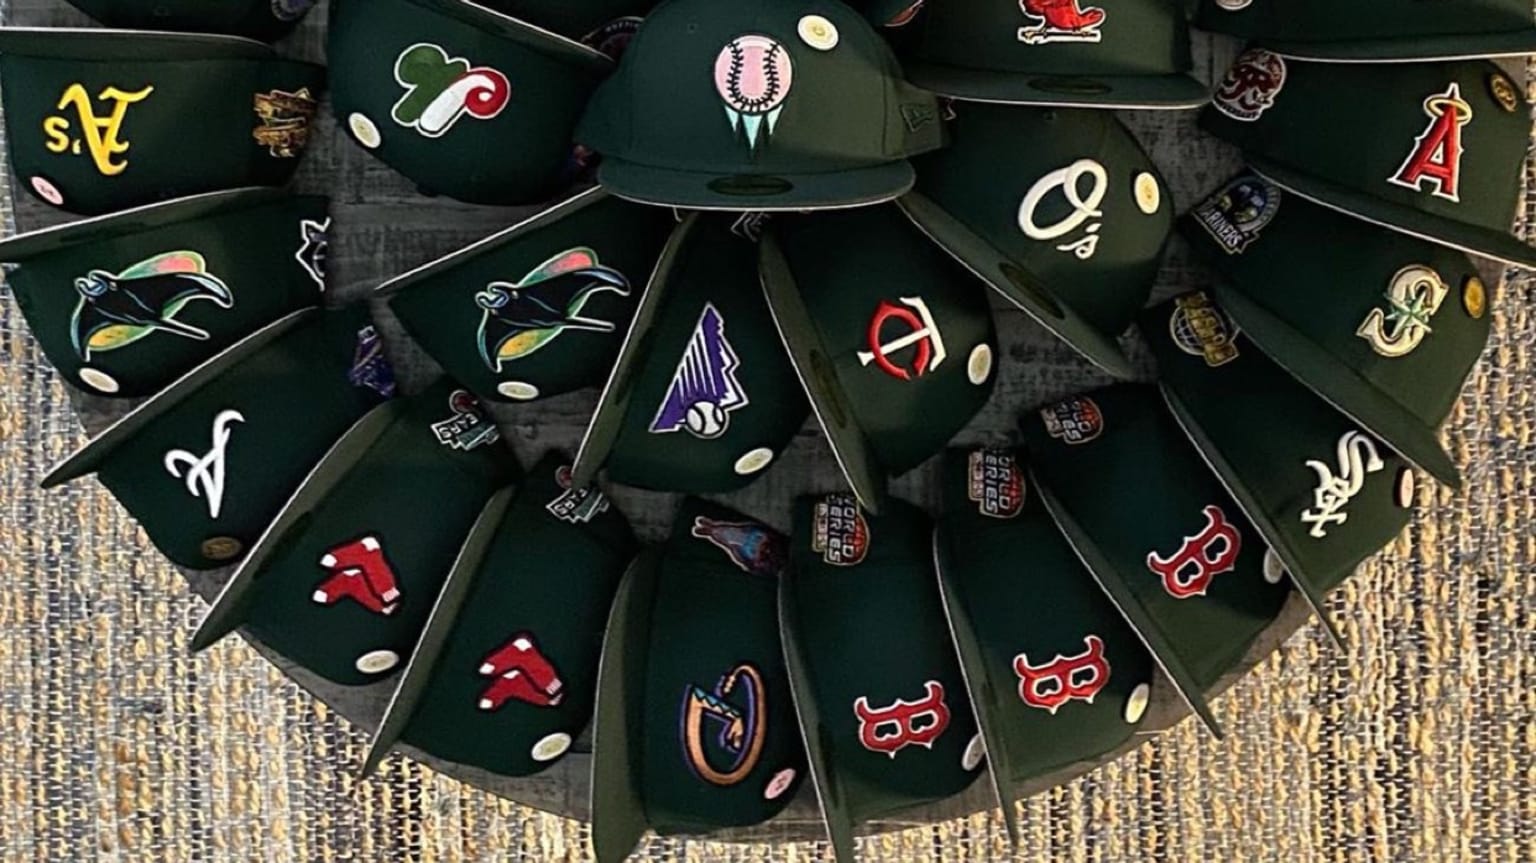 When cap collecting turns into more than a hobby